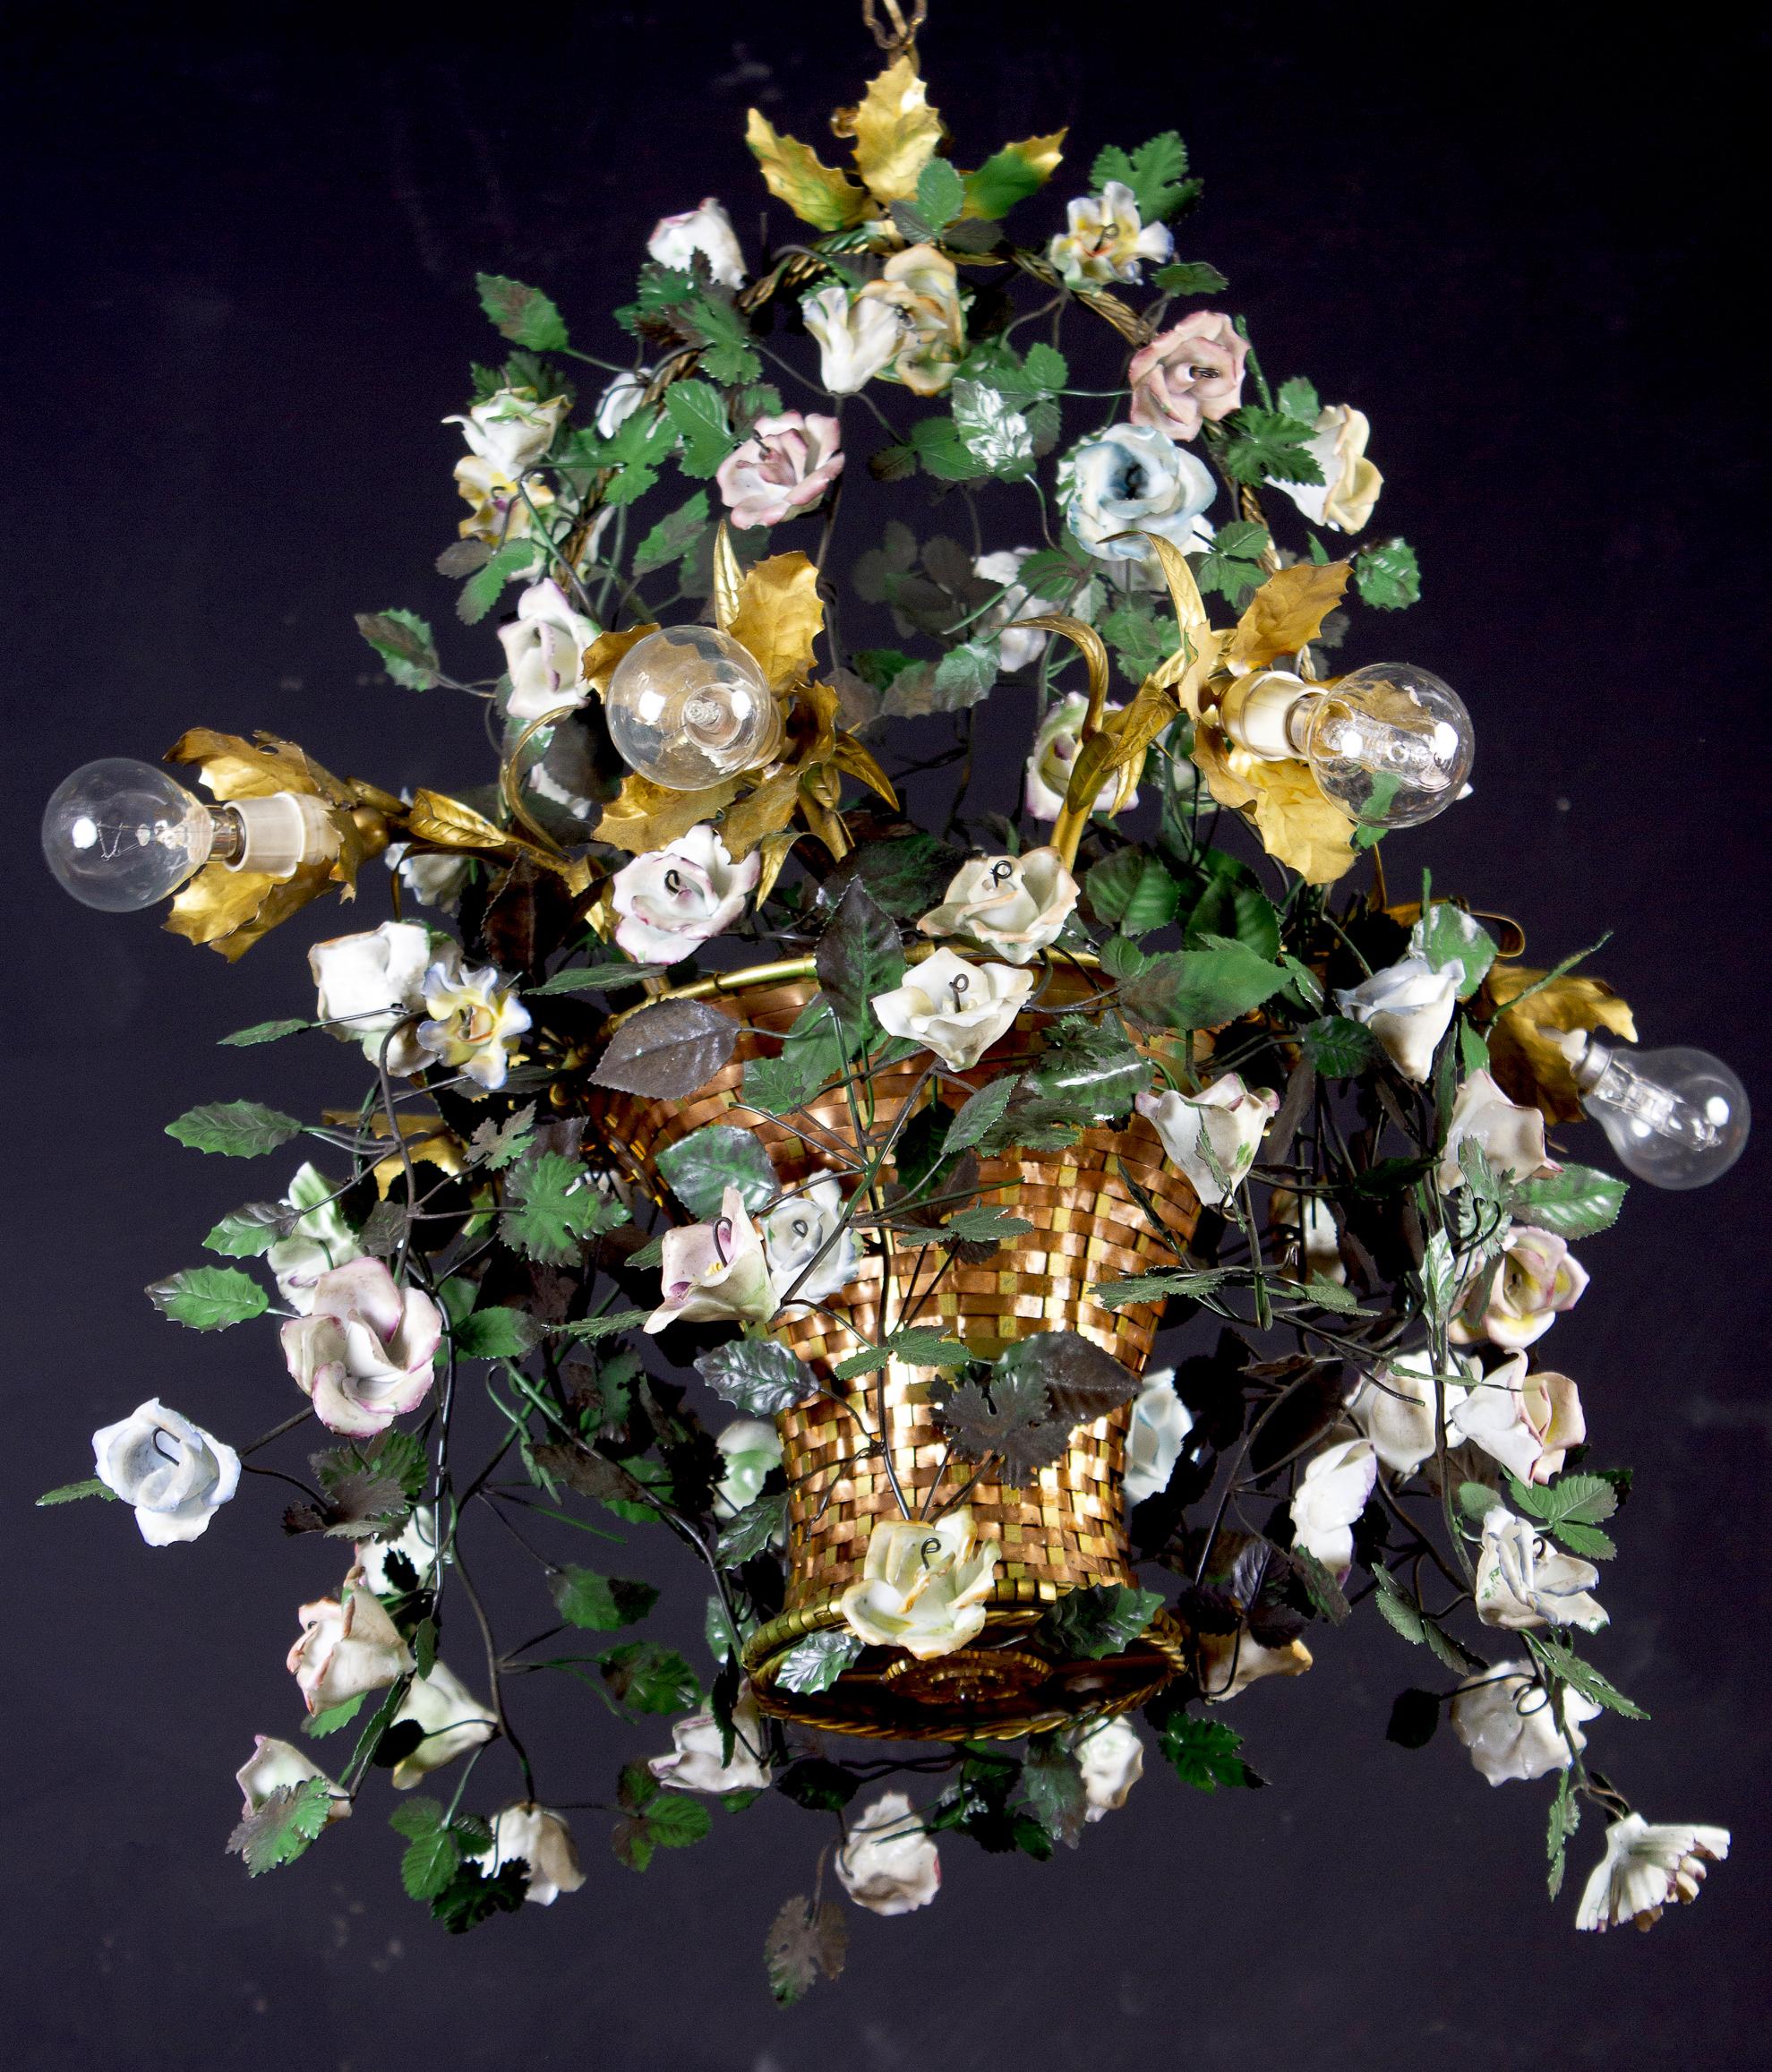 Italian Art Deco Piedmontese cage form chandelier ornamented with colorful porcelain flowers and hand painted tole leaves.
Six E14 light bulbs, we can rewire for your country standards.
Amazing decoration for your interior or patio.